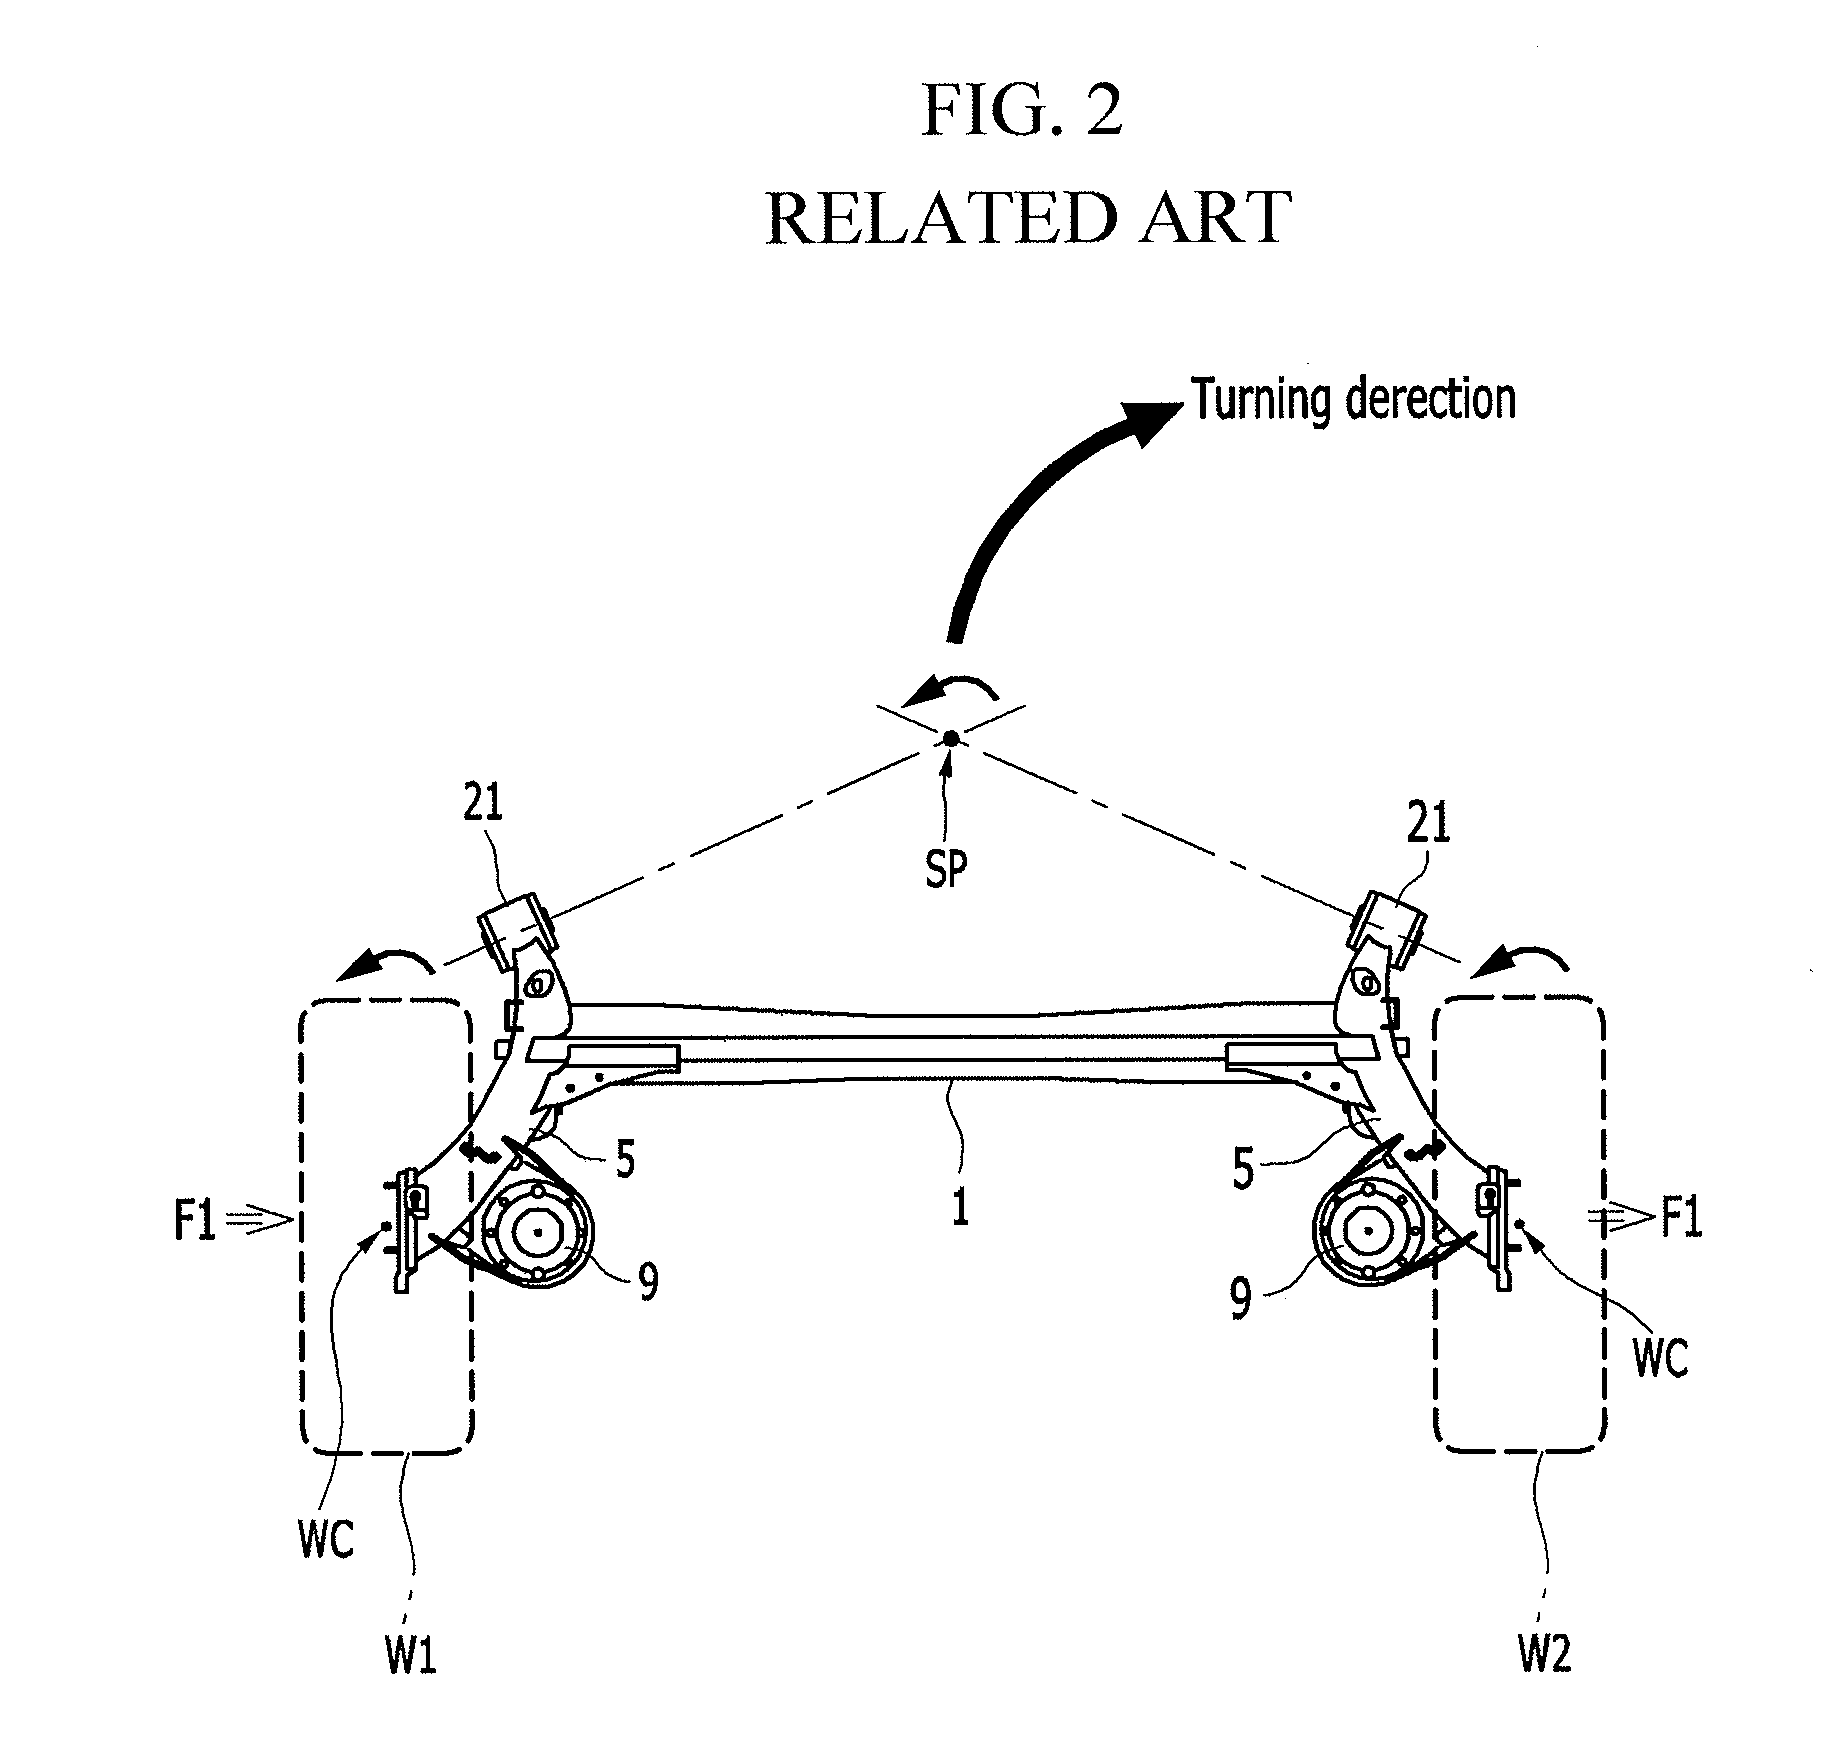 Coupled torsion beam axle type suspension system